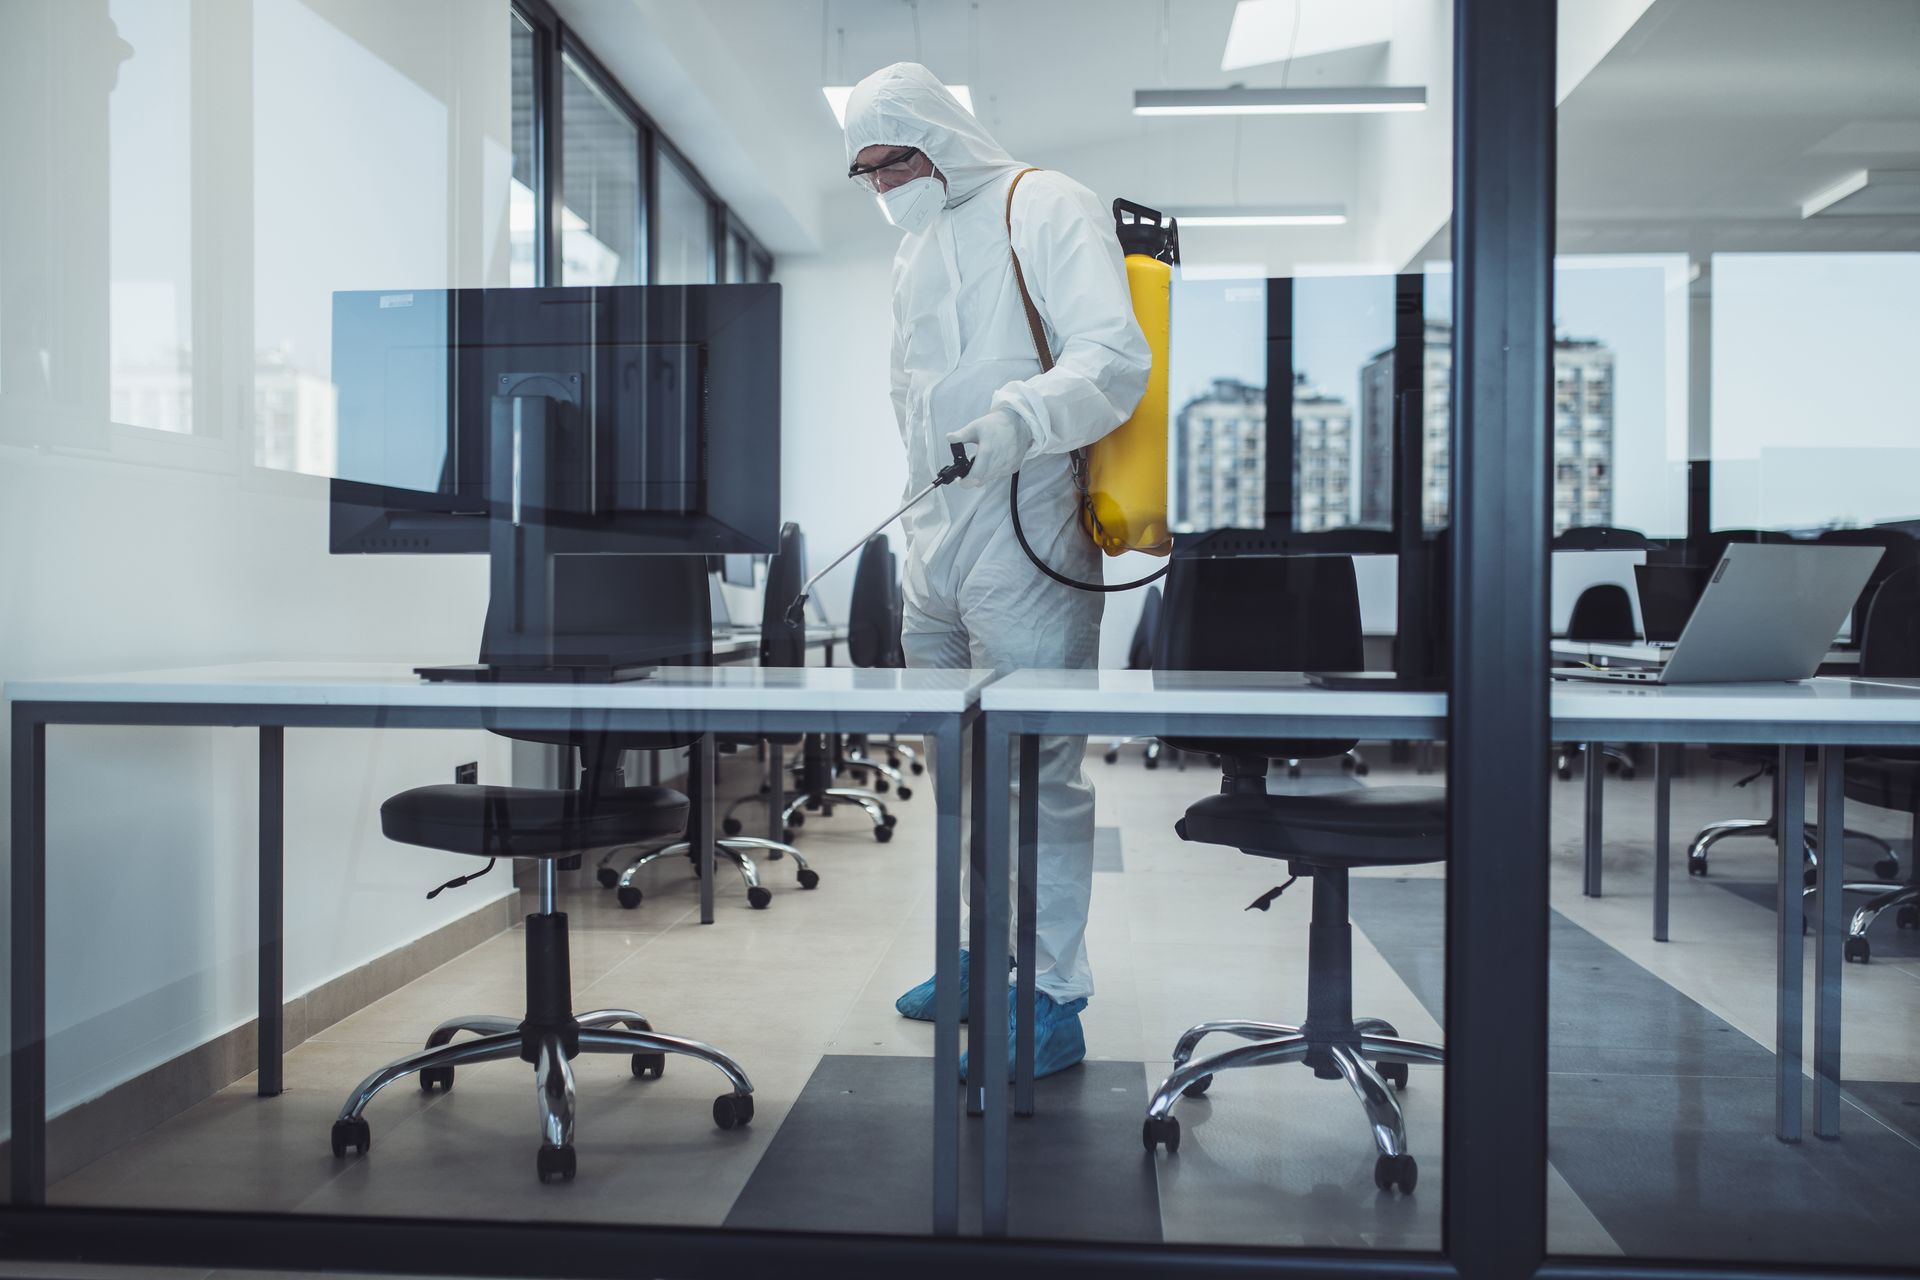 a man in a protective suit is disinfecting an office with a sprayer